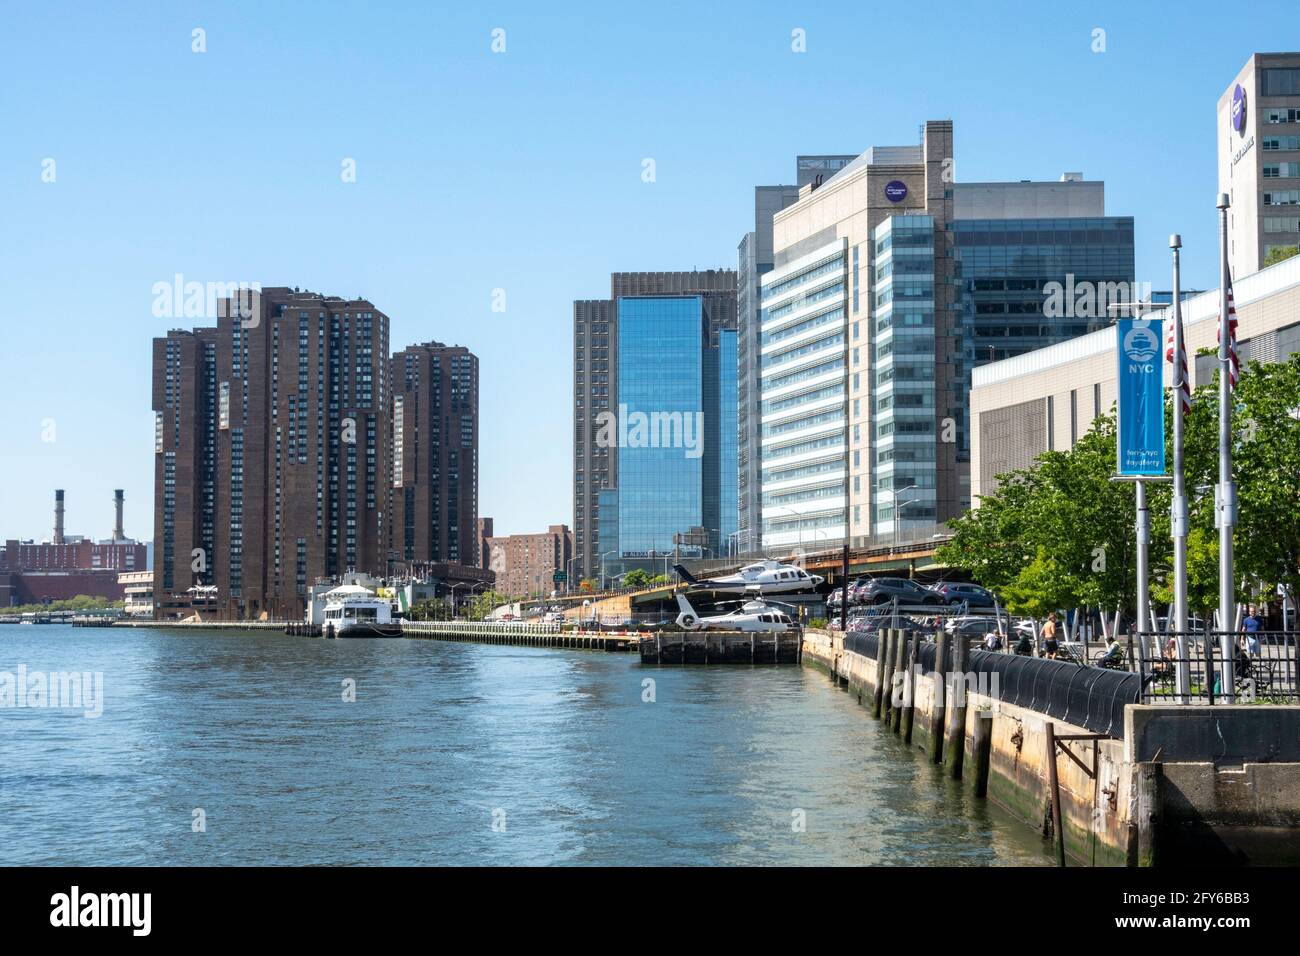 The East 34th Street Heliport is located on the East River under the FDR Drive in NewYork City, USA Stock Photo